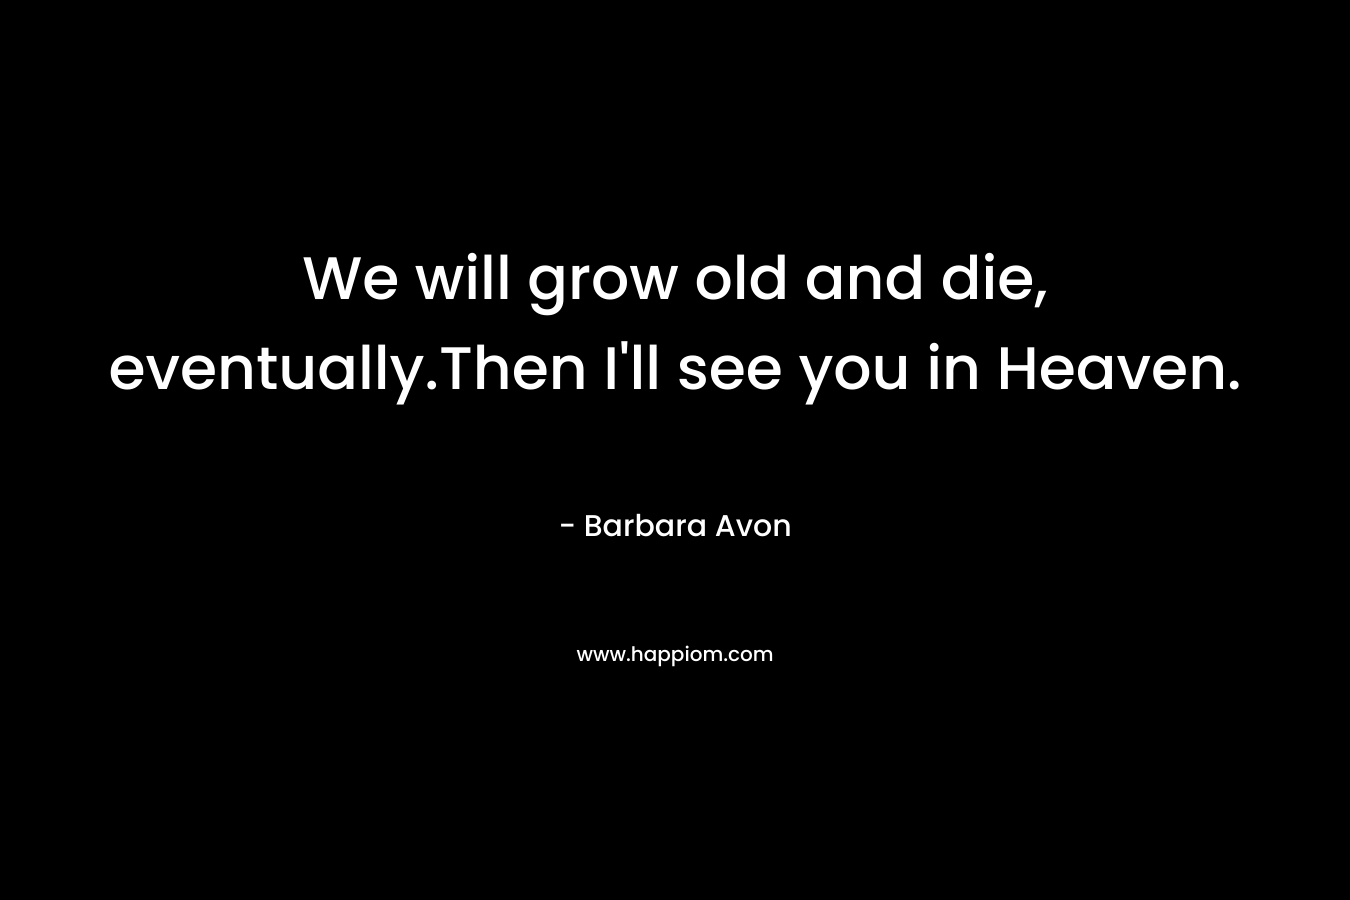 We will grow old and die, eventually.Then I’ll see you in Heaven. – Barbara Avon